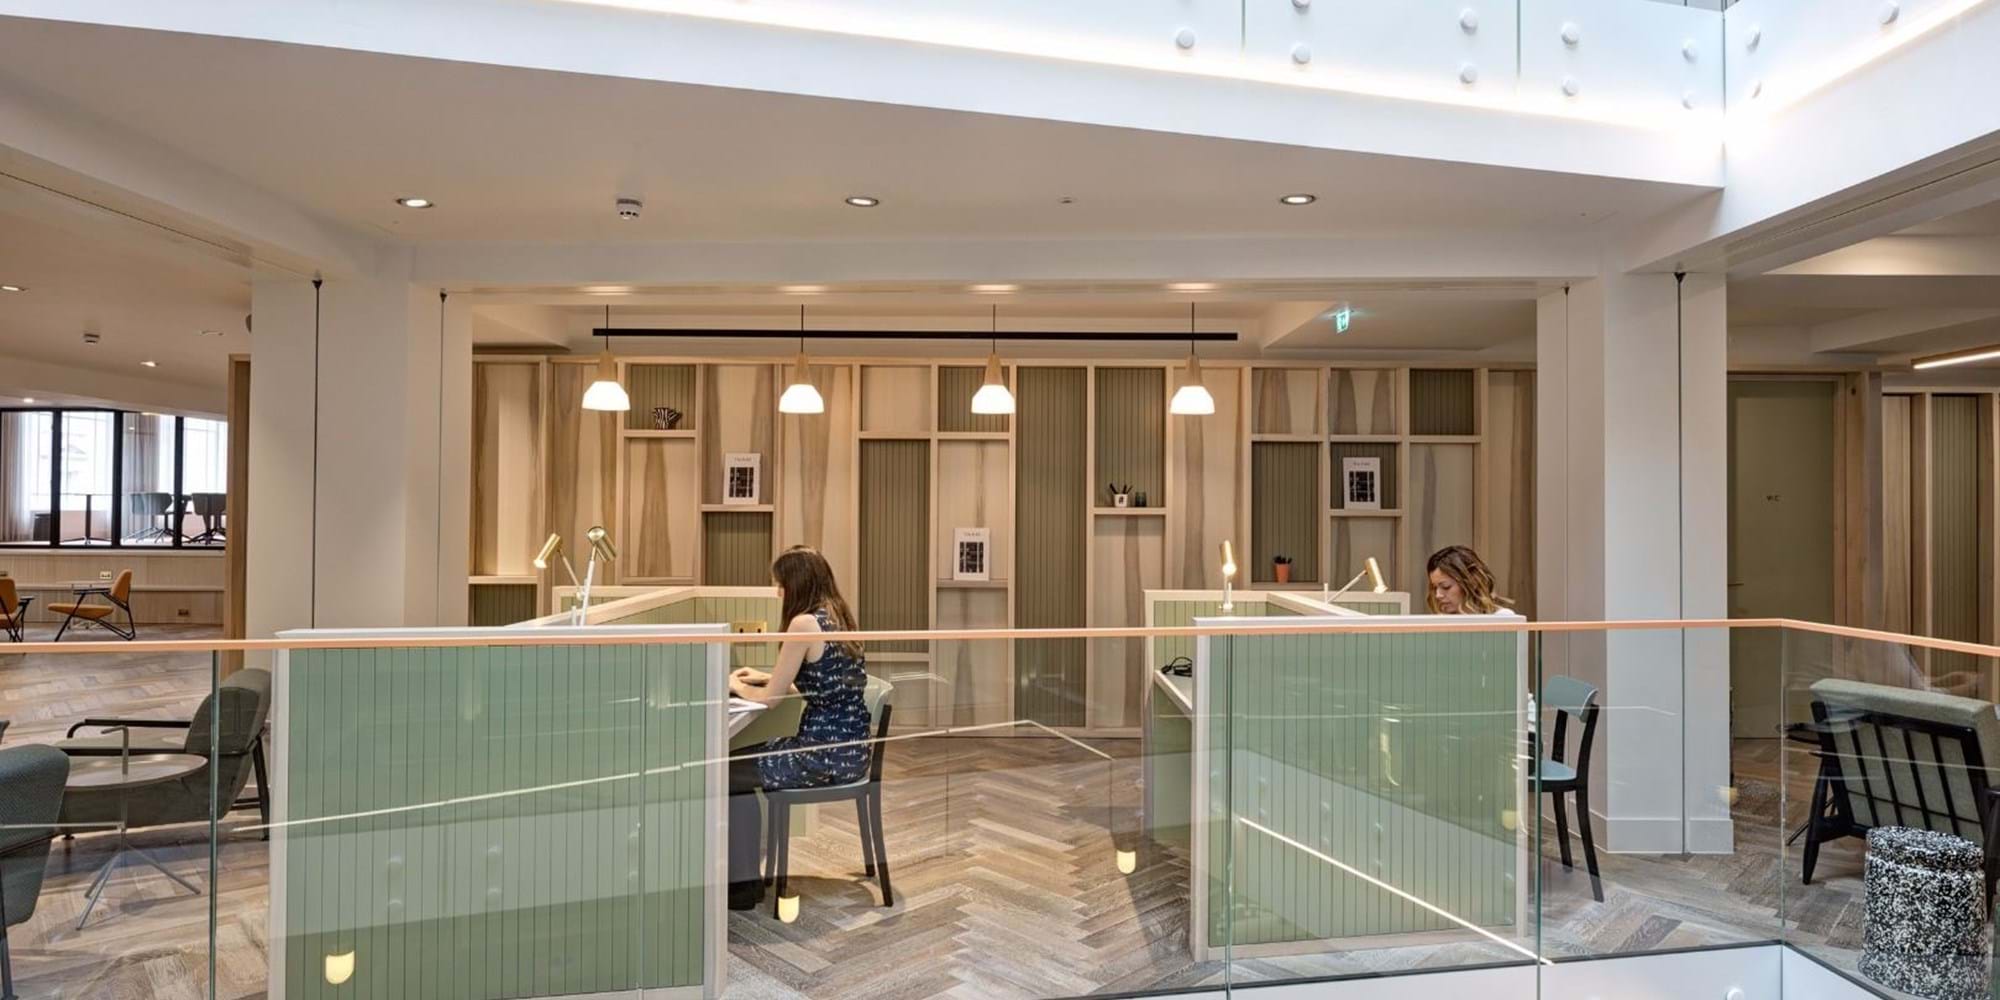 Modus Workspace office design, fit out and refurbishment - TOG - Wimpole Street - TOG Wimpole St 13 highres sRGB.jpg